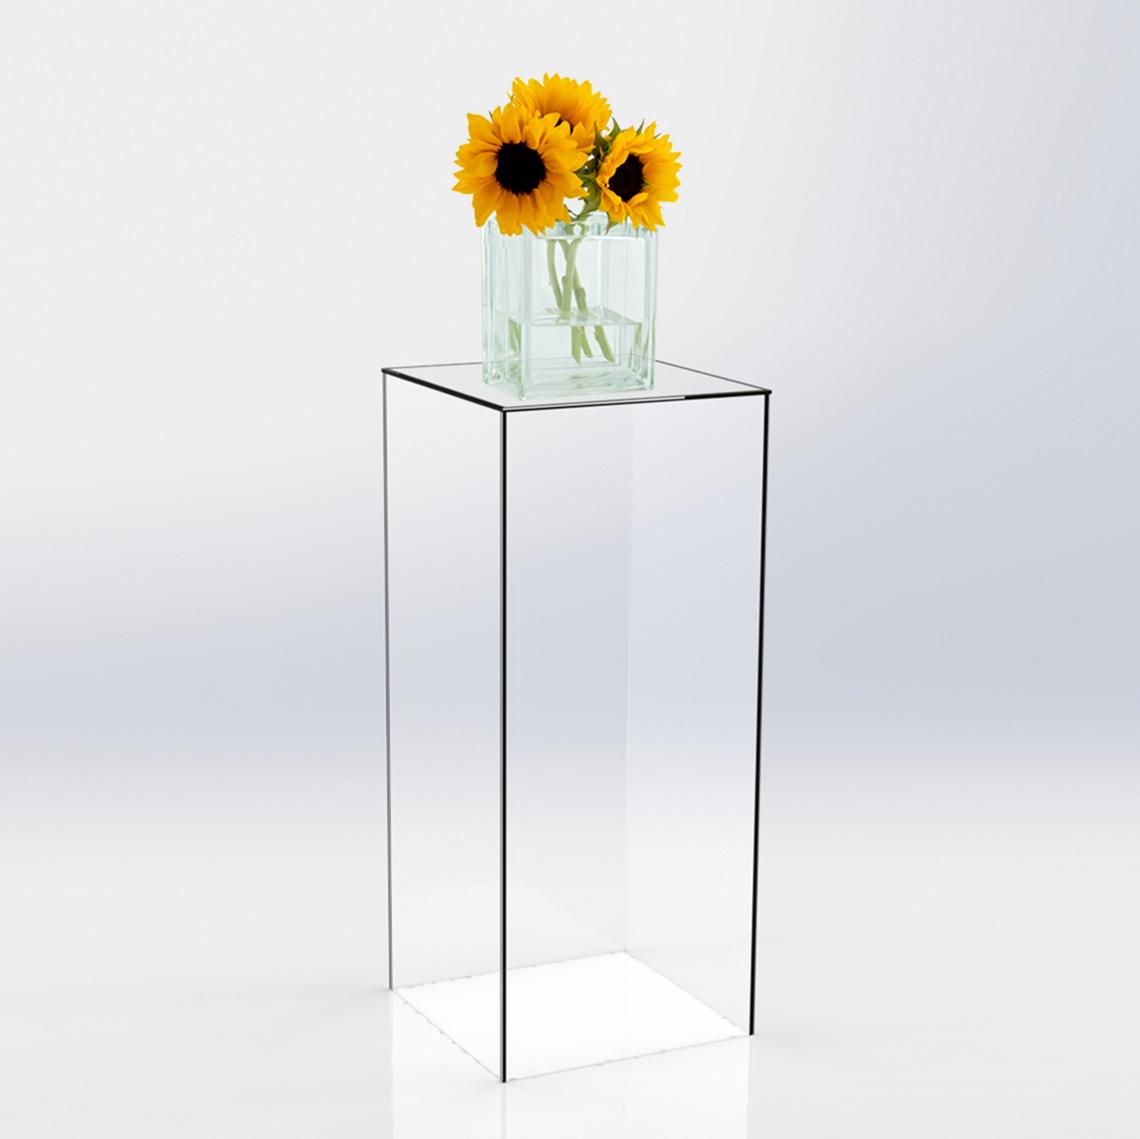 Eeze Limited Small Crystal Clear Acrylic Plinths for Displays Set of 3 